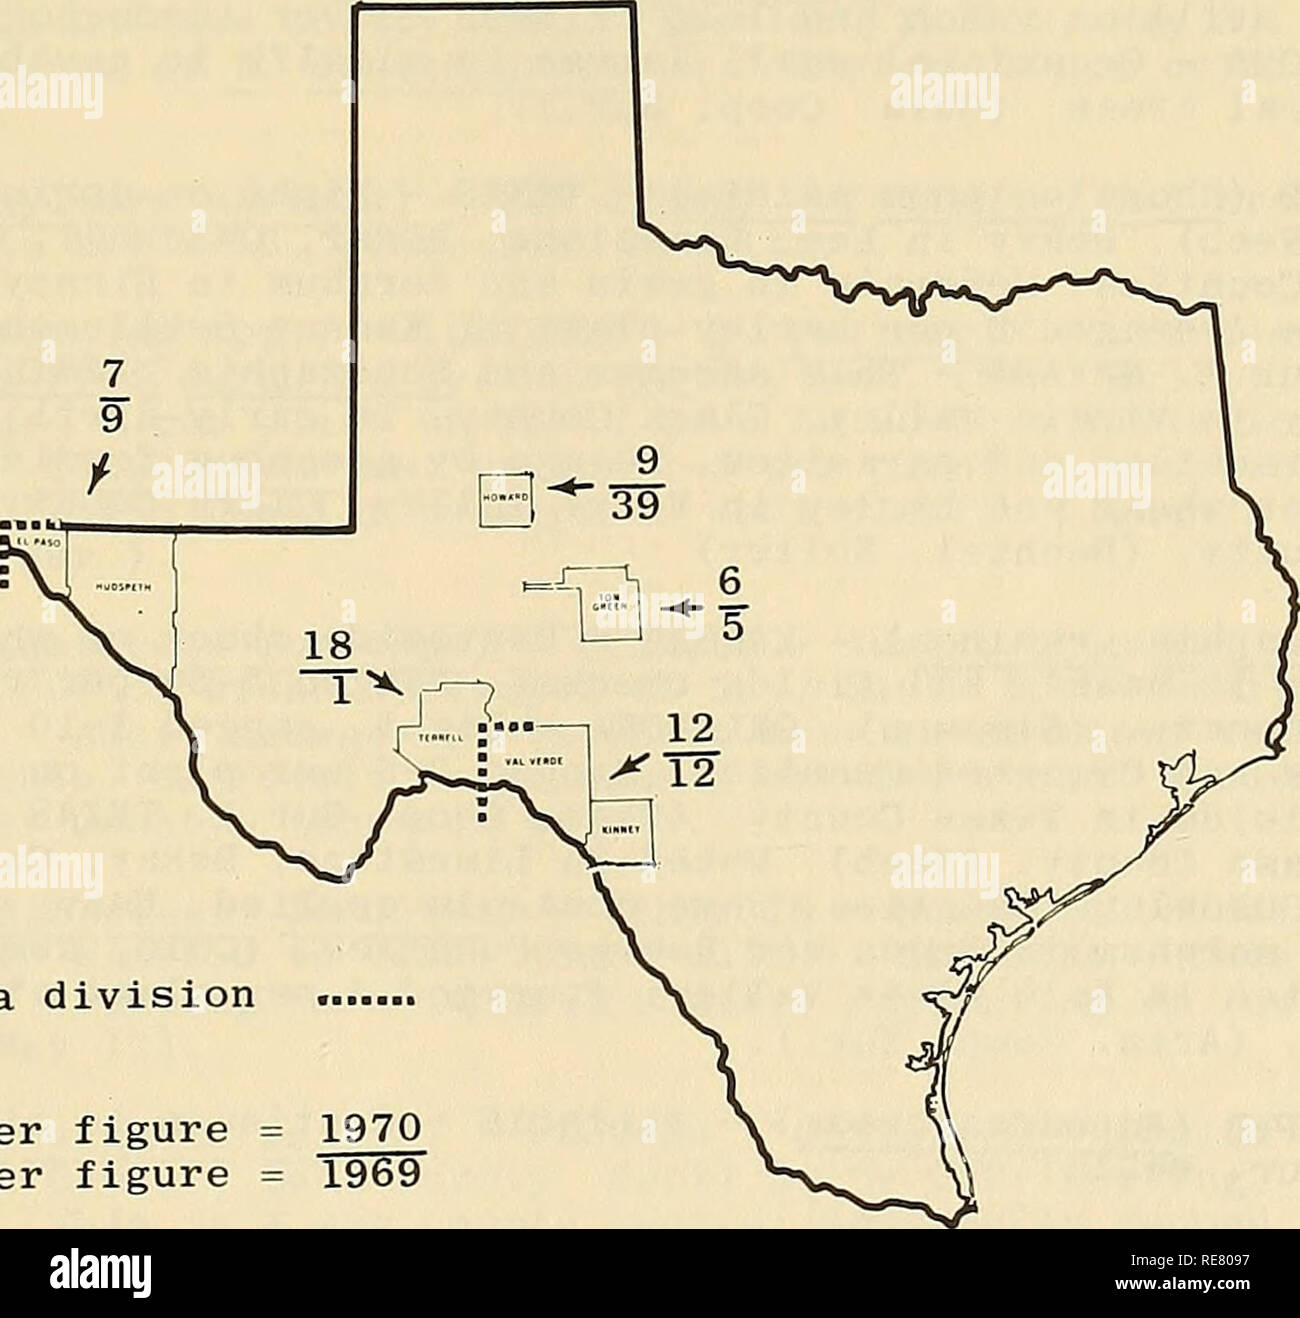 . Cooperative economic insect report. Beneficial insects; Insect pests. - 333 SPECIAL INSECTS OF REGIONAL SIGNIFICANCE Potato Psyllid Survey, Spring Breeding Areas of Texas The potato psyllid (Paratrioza cockerelli (Sulc)) survey in Texas was completed April 17, 1970. Compared with 1969, psyllid counts remained the same in the Del Rio area, decreased in Big Spring and El Paso areas, and increased in the Marathon-Sanderson and San Angelo areas. Rainfall was above average and temperatures were colder this past winter. Lycium host plants are in fair to excellent condition and heavily leafed in al Stock Photo